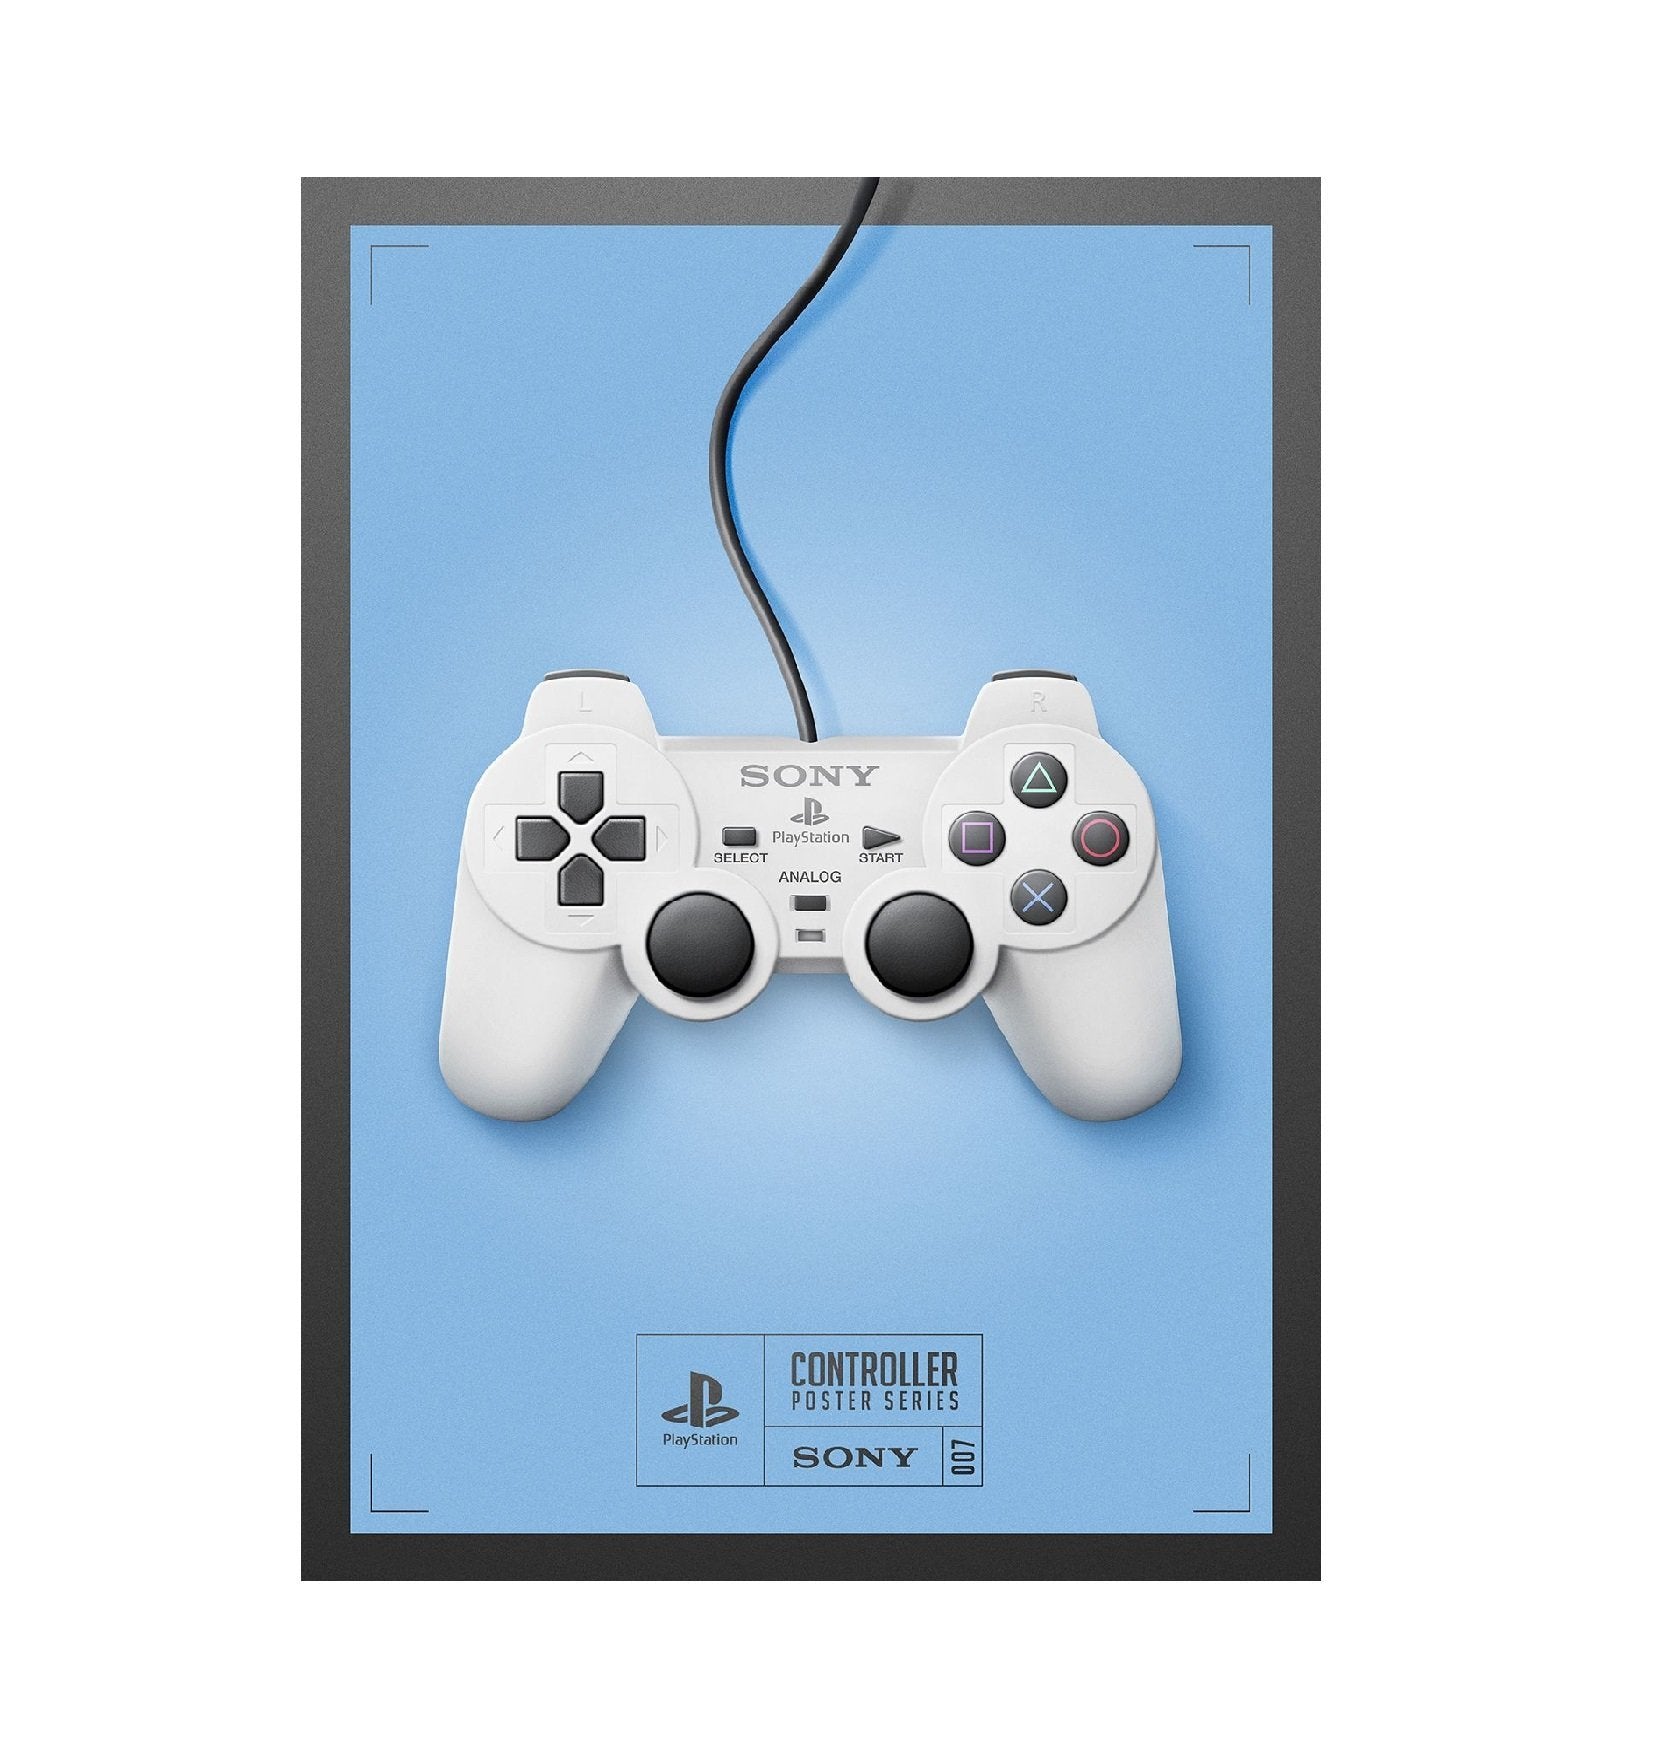 PlayStation Controller Poster Series - Store 974 | ستور ٩٧٤